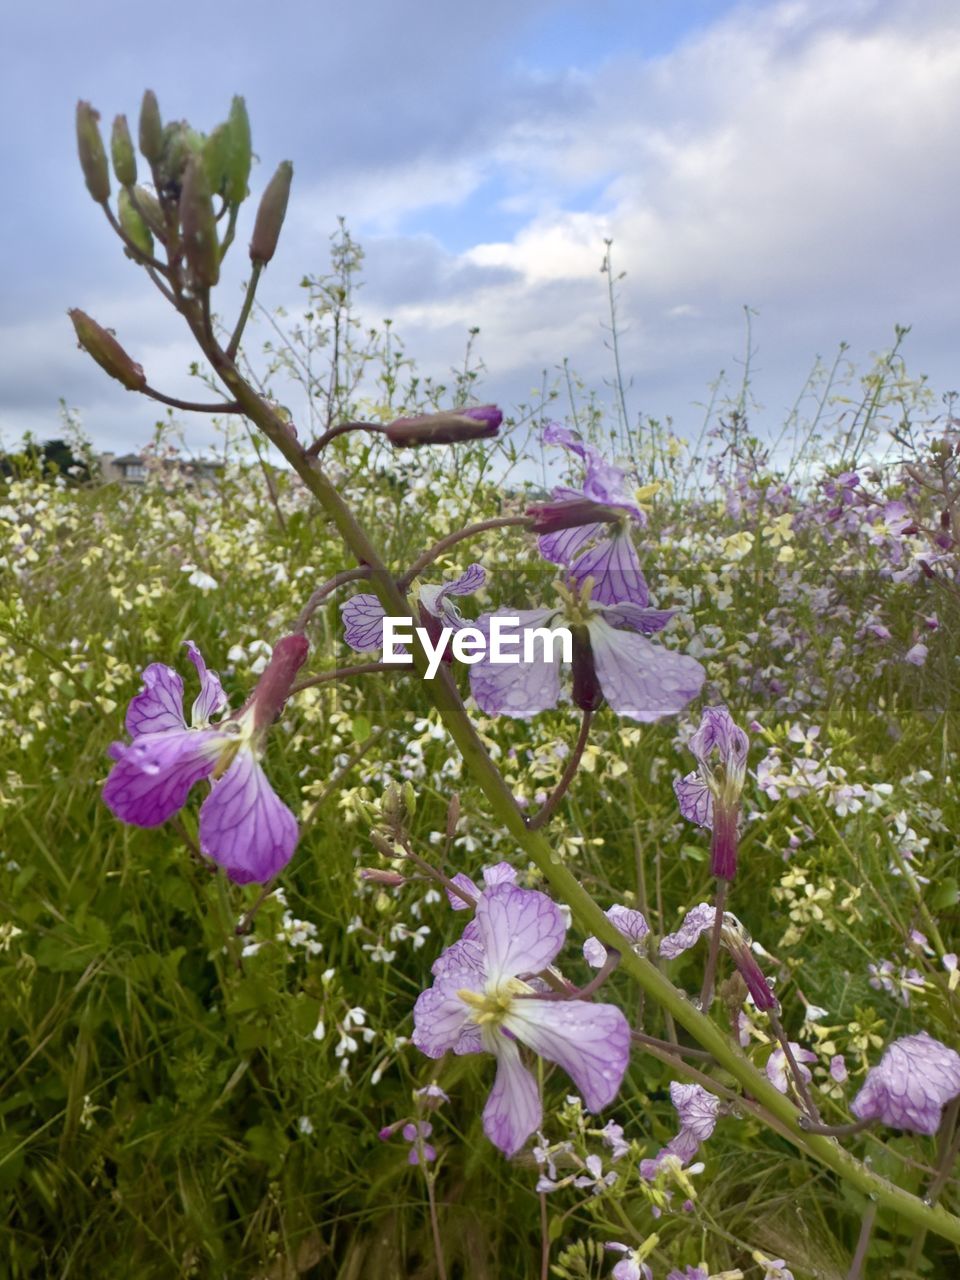 plant, flower, flowering plant, beauty in nature, freshness, blossom, nature, sky, cloud, wildflower, meadow, growth, fragility, purple, springtime, pink, no people, petal, flower head, inflorescence, close-up, outdoors, day, land, field, botany, tree, environment, landscape, grass